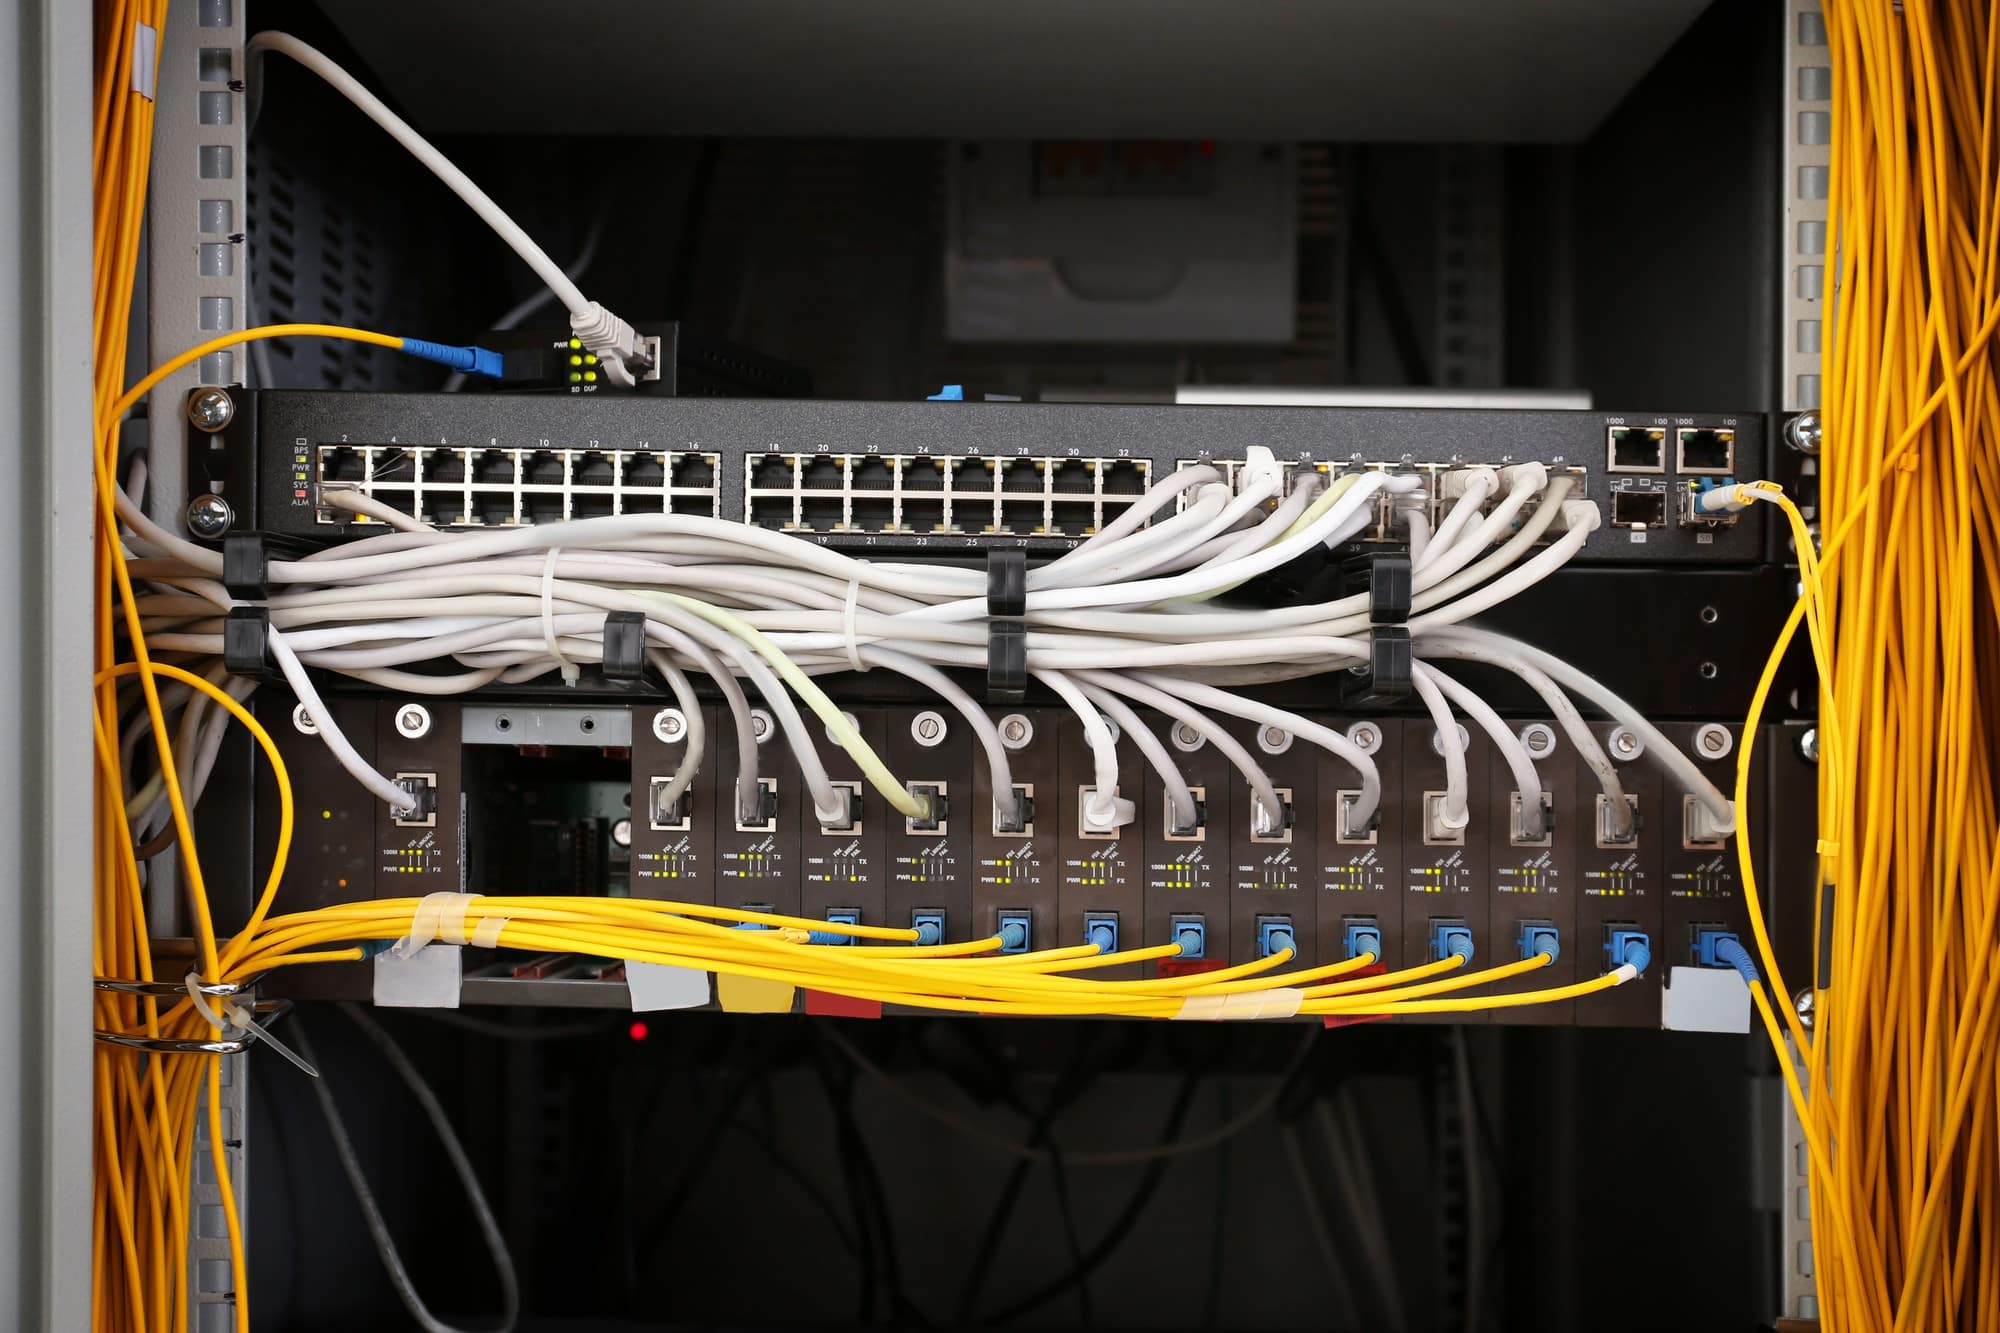 Network Cabling Installation Services